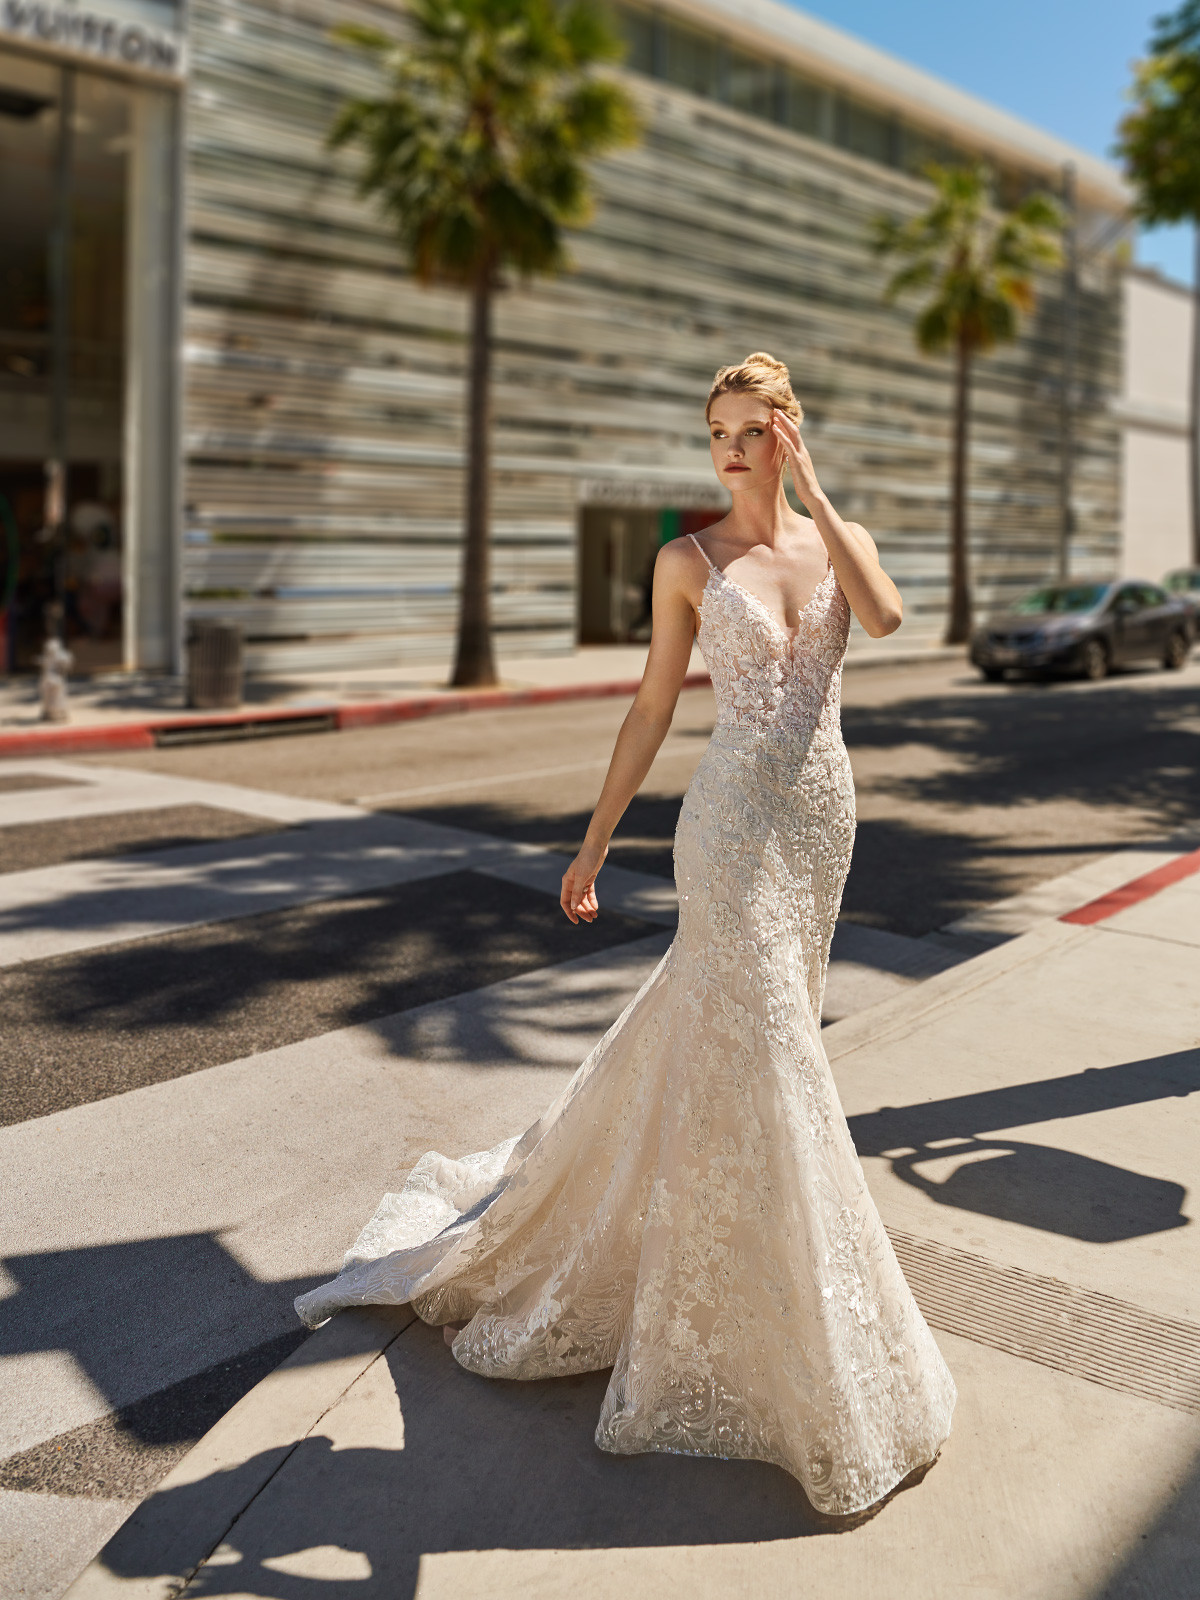 USA Bridal Gowns Fit Every Bride with Different Body Types